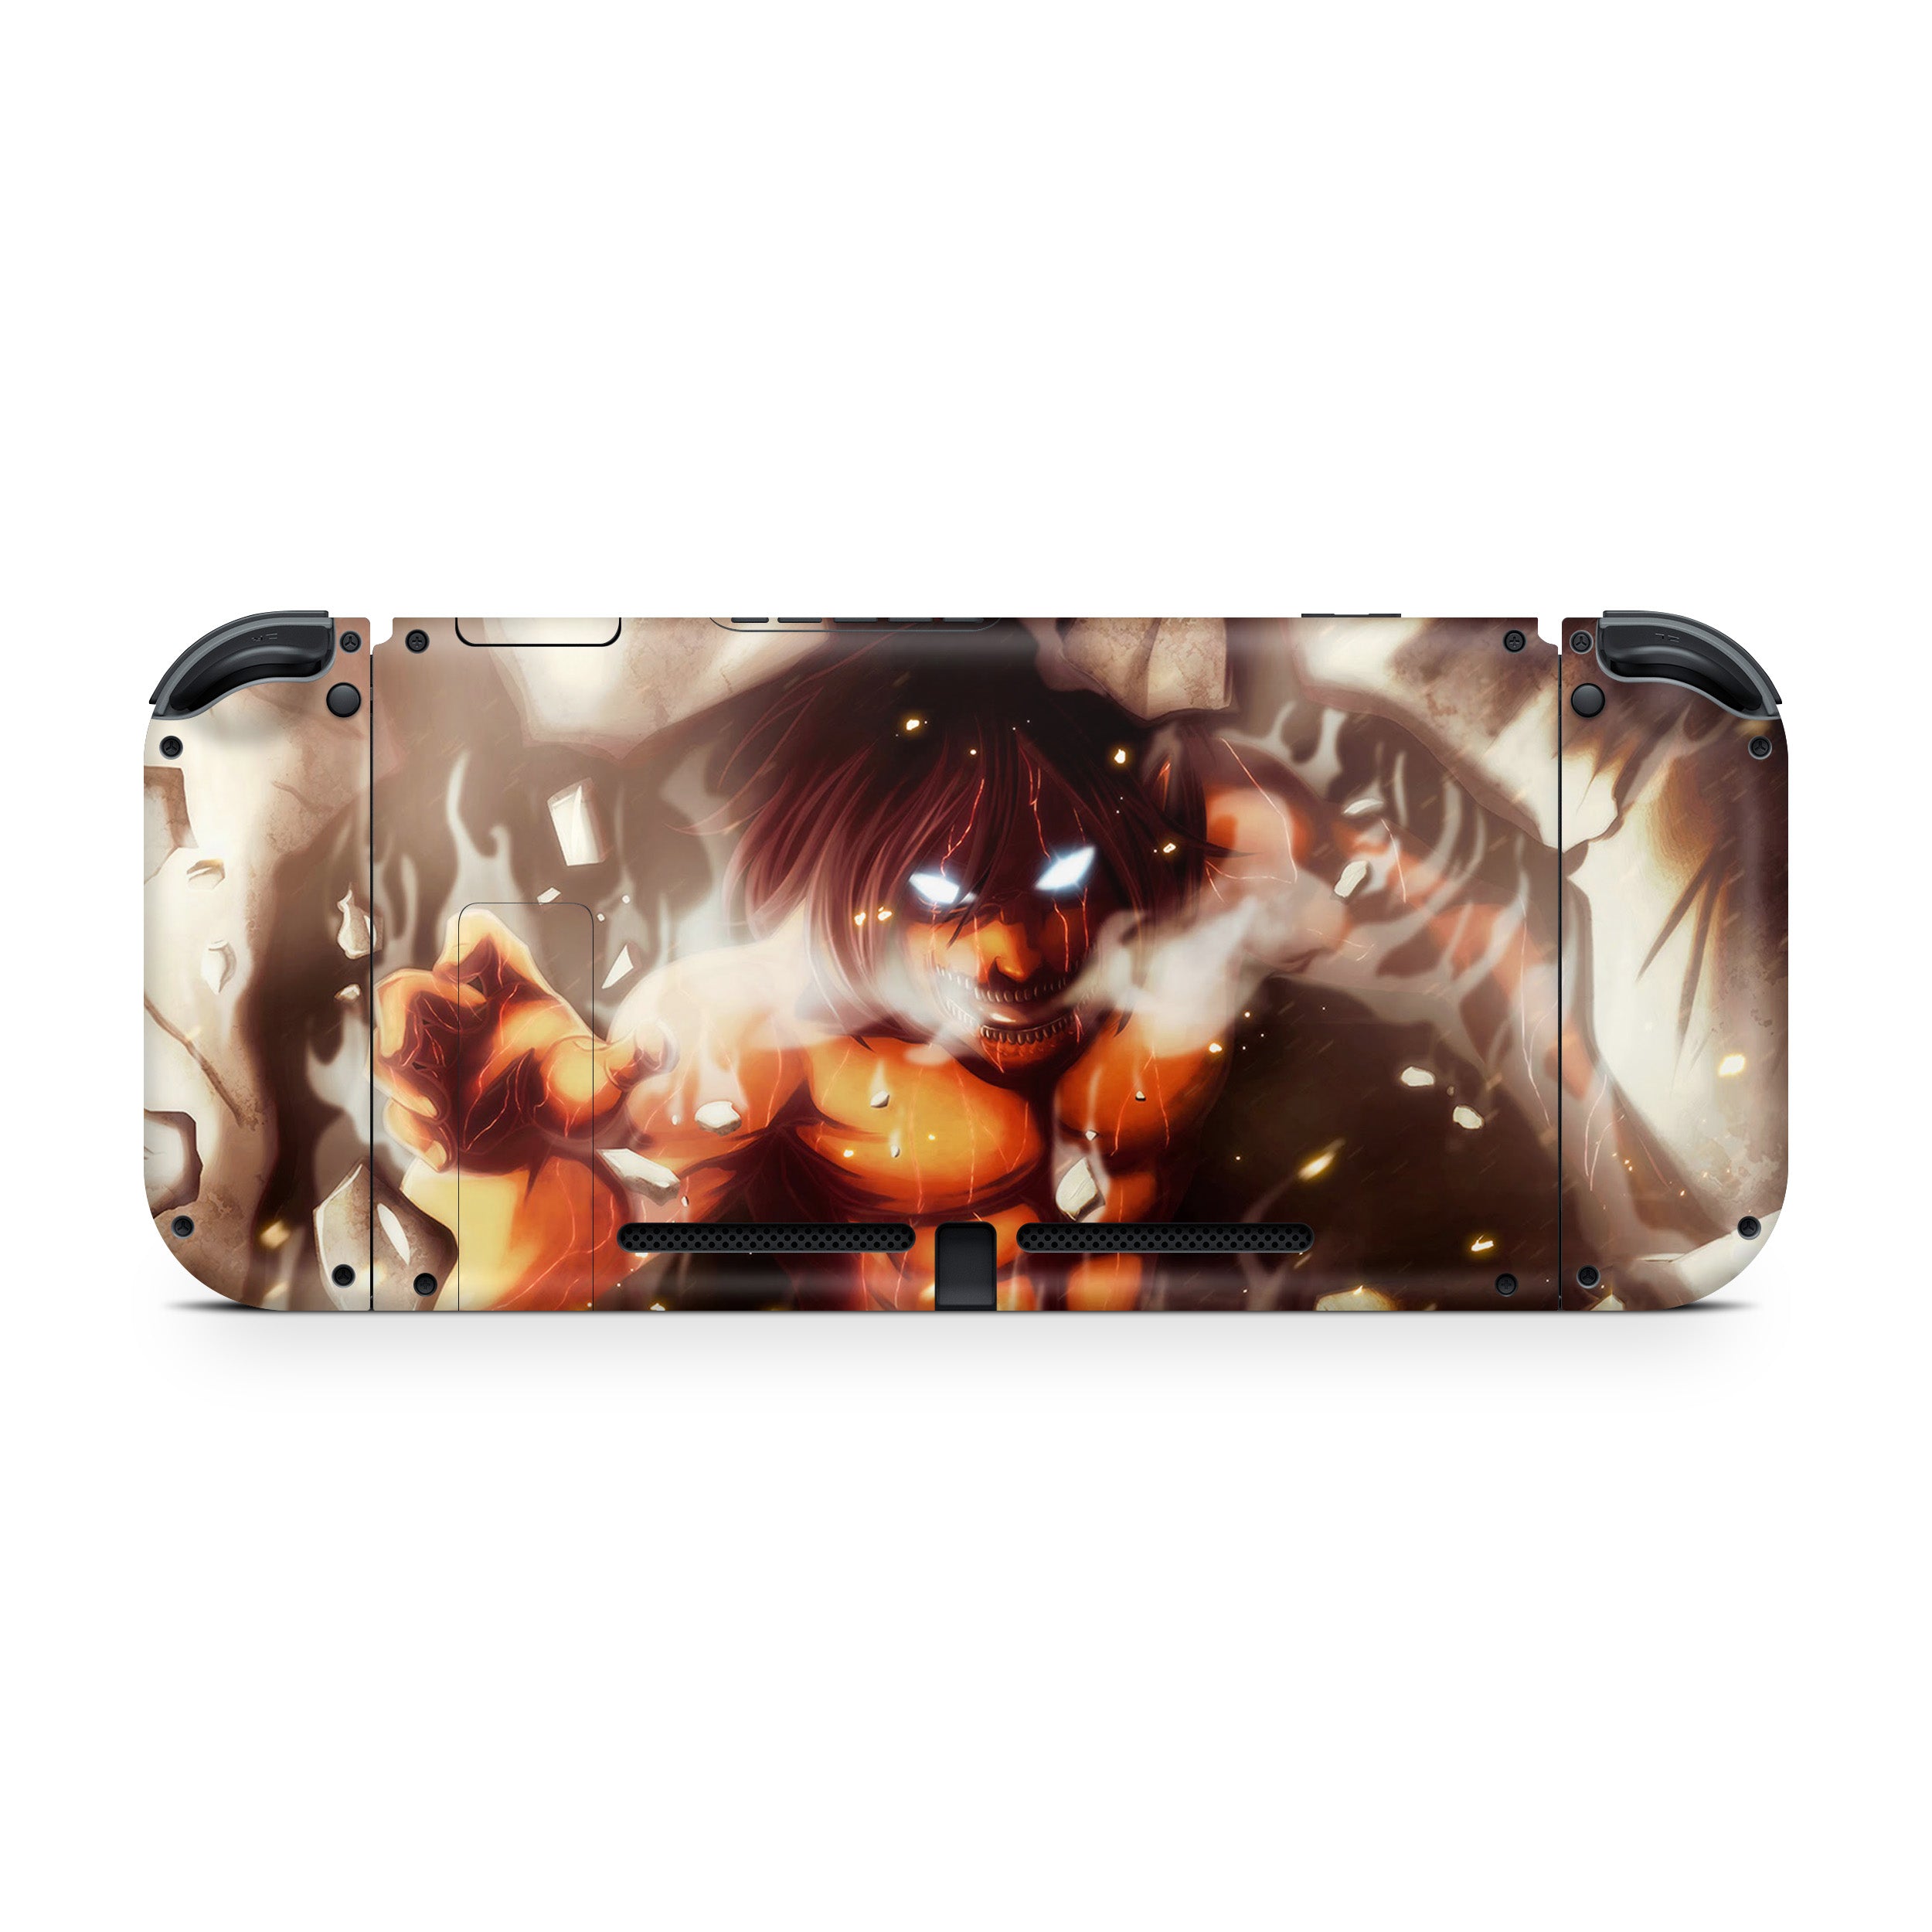 A video game skin featuring a Attack On Titan Eren Yeager design for the Nintendo Switch.